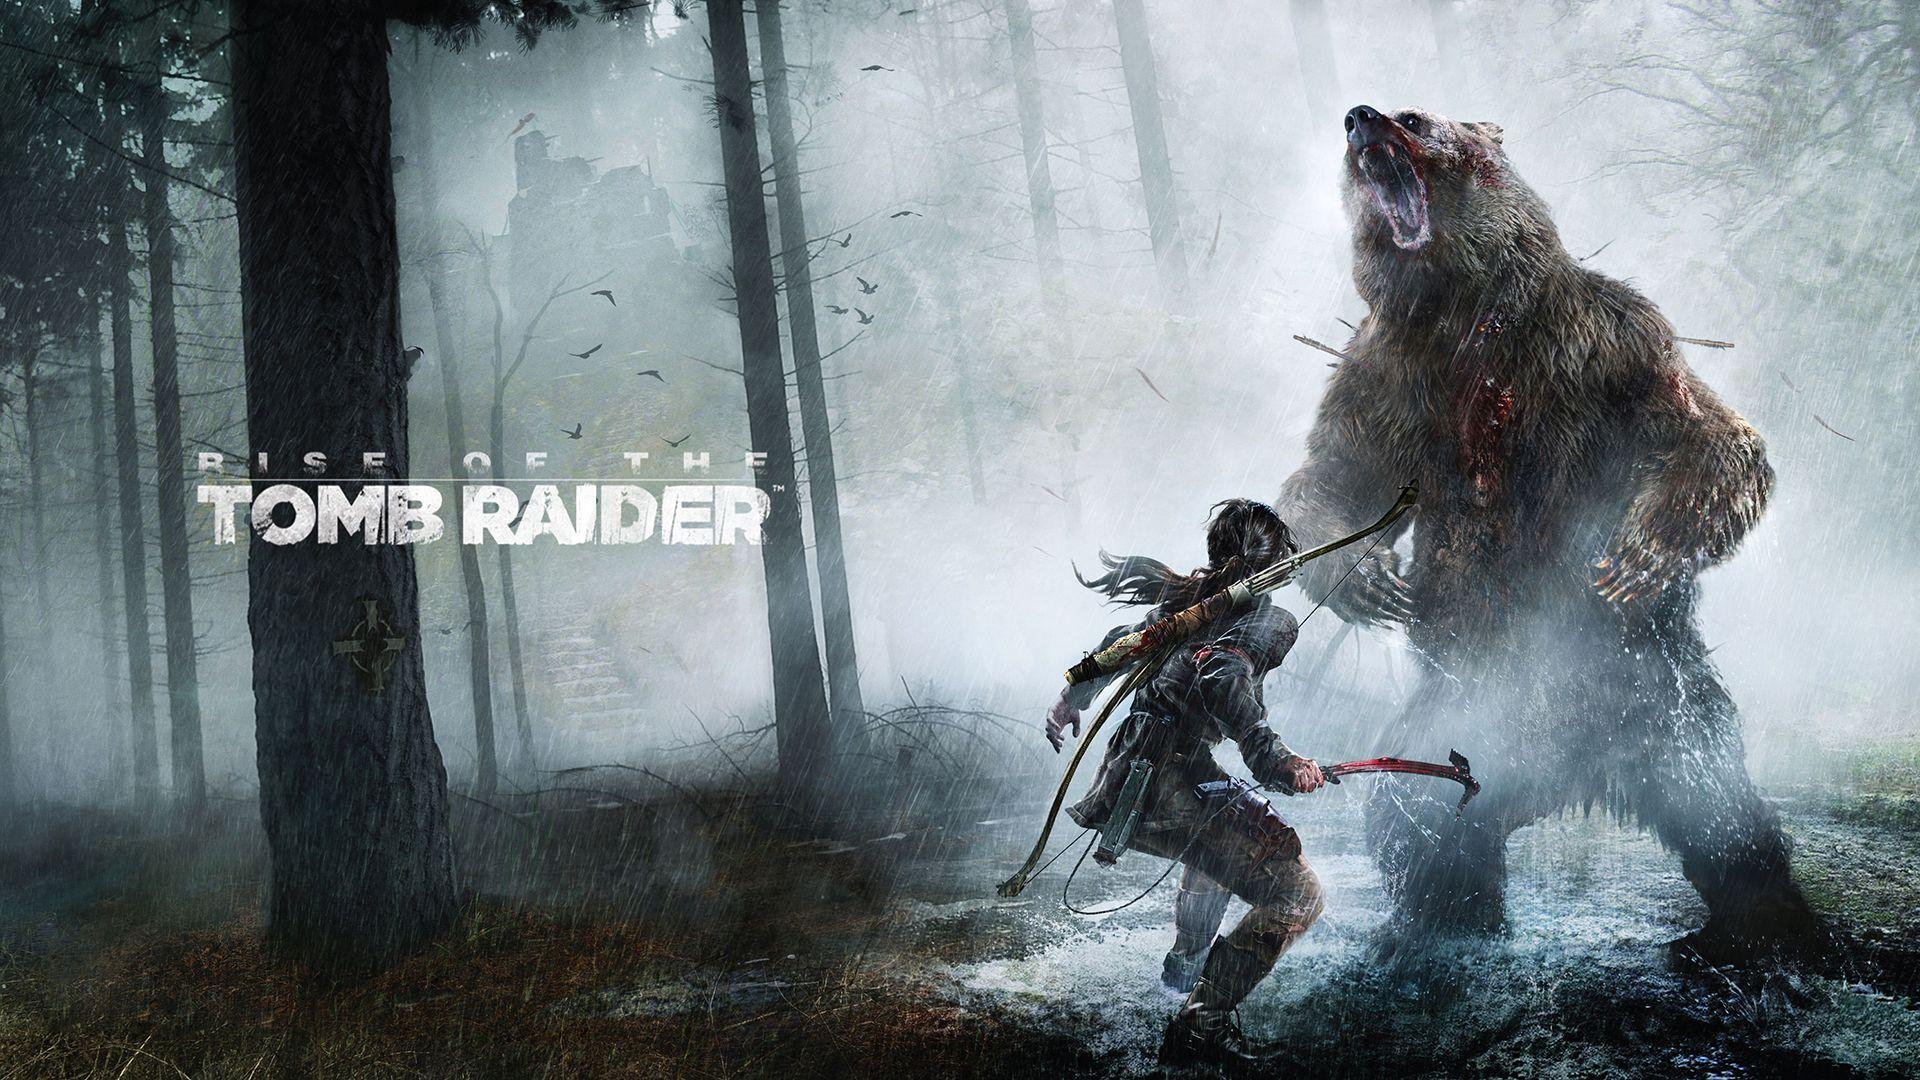 Rise of the Tomb Raider PC Game Wallpaper